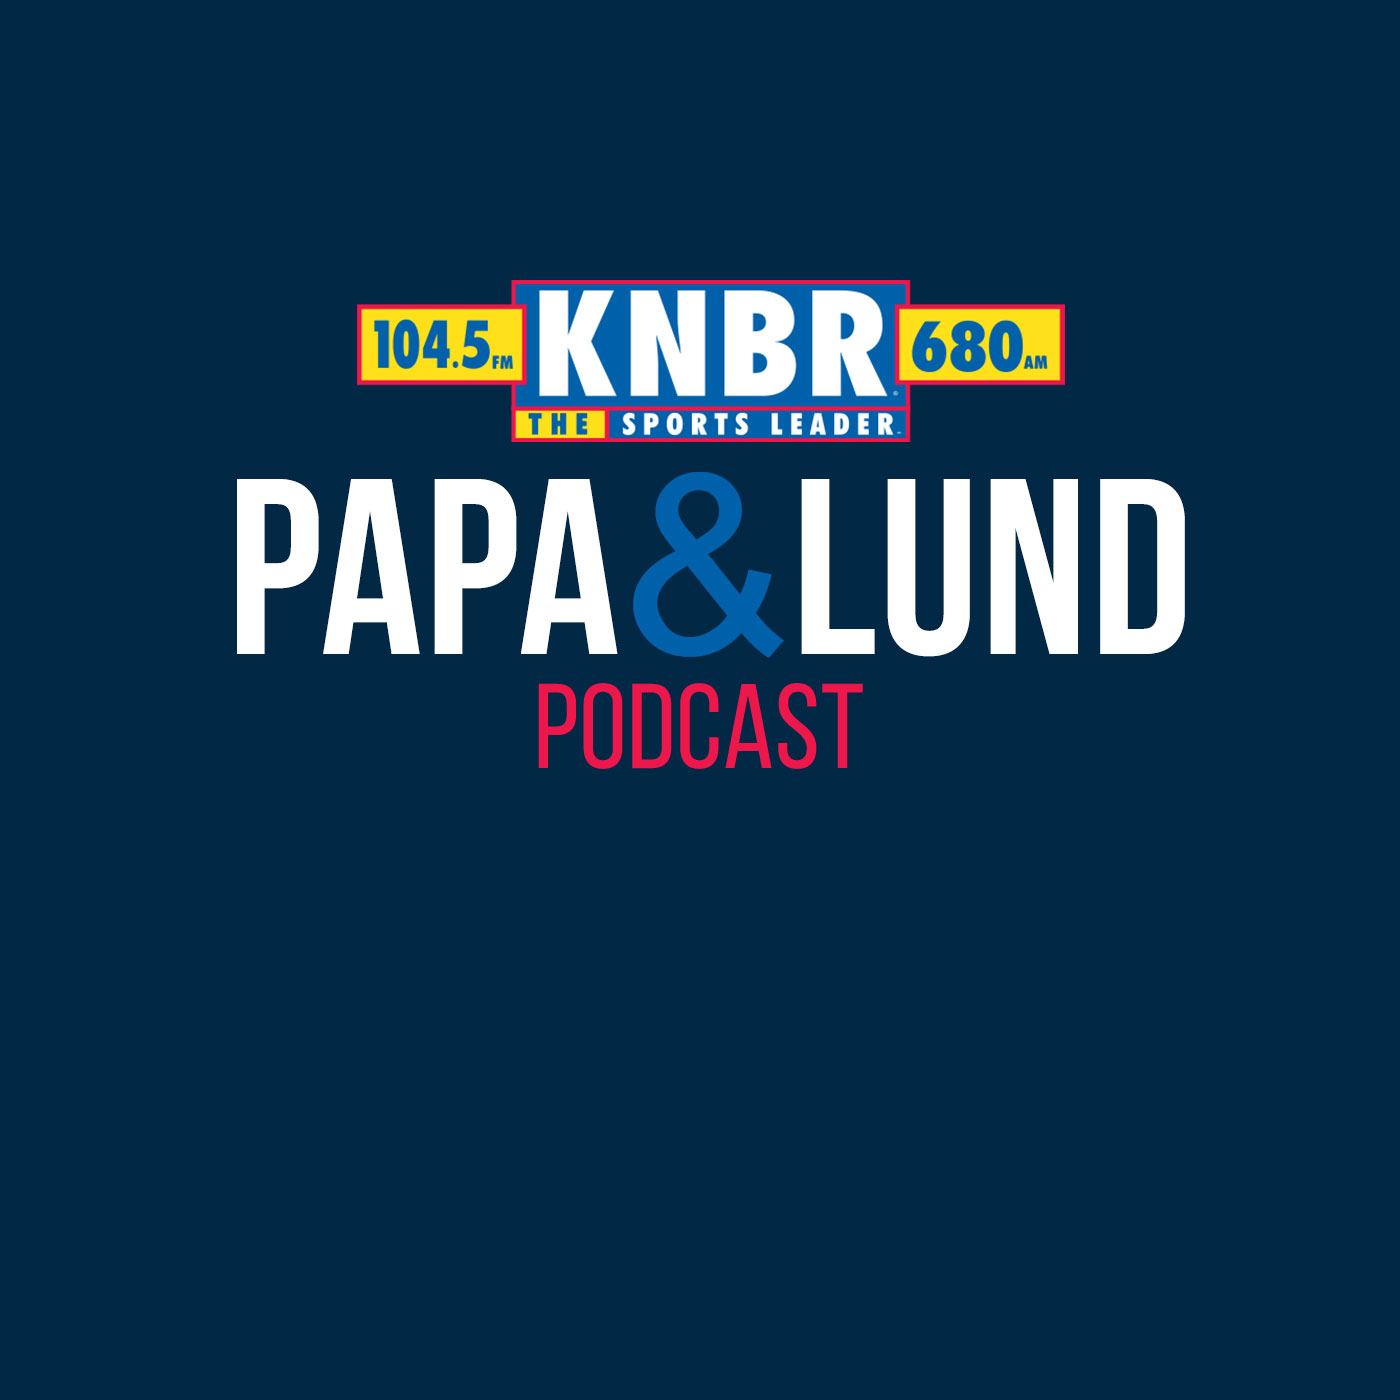 10-24 Ian Eagle joins Papa & Lund to discuss Warriors basketball as they Open against the Suns as Kevin Durant makes his return to Chase Center for the first time in front of Dub Nation